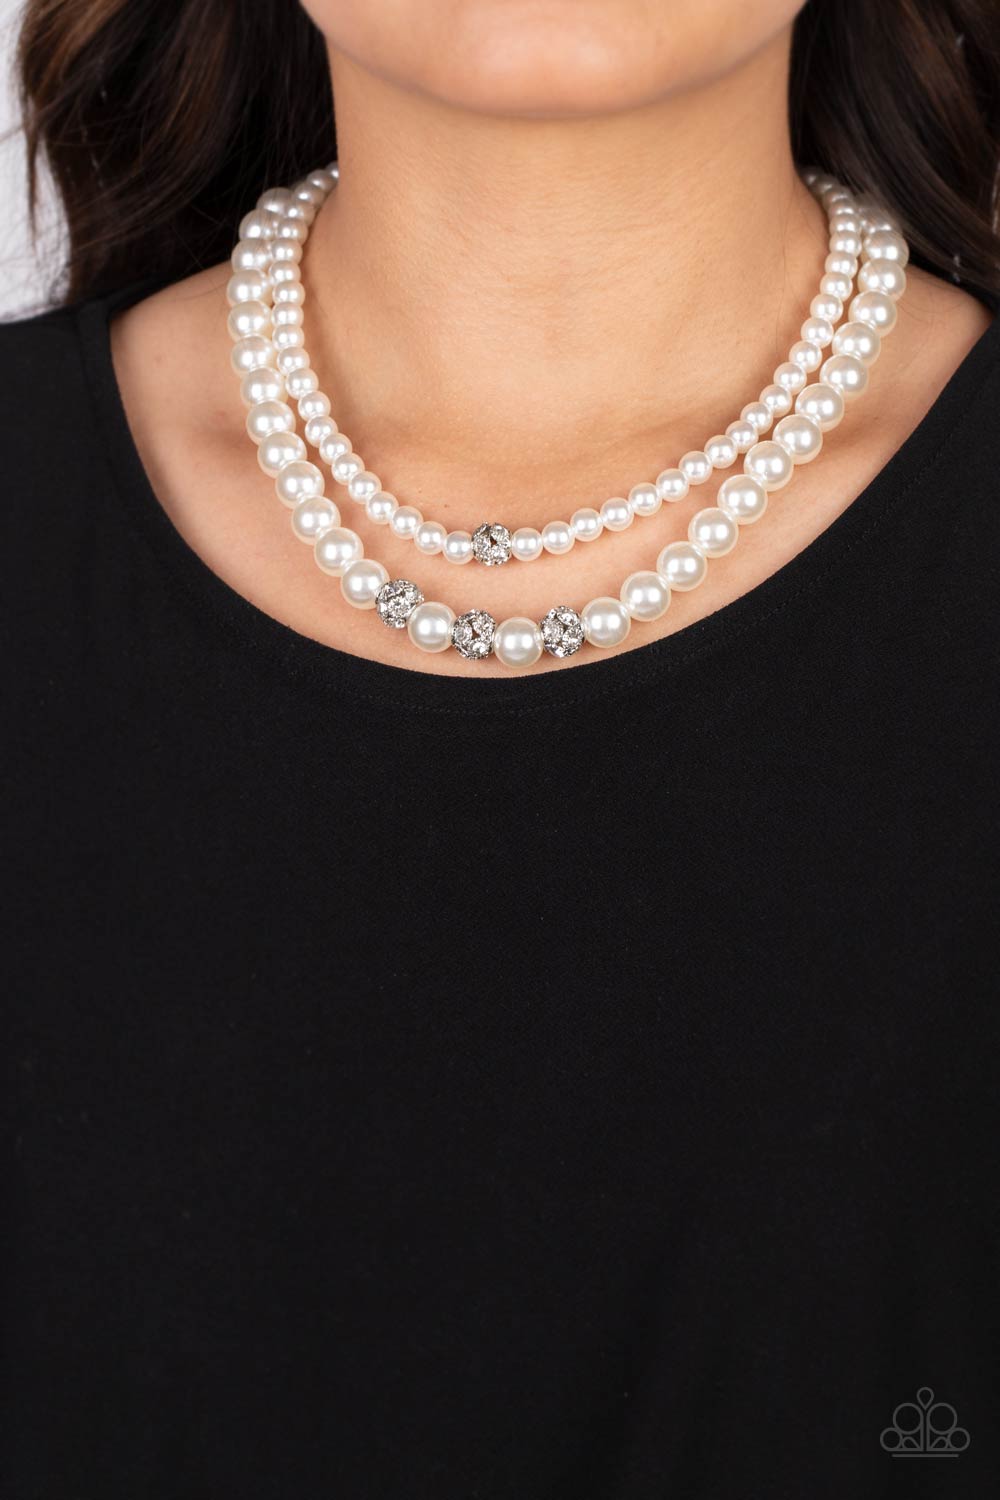 Brilliant Ballerina White Pearl Necklace - Paparazzi Accessories-on model - CarasShop.com - $5 Jewelry by Cara Jewels